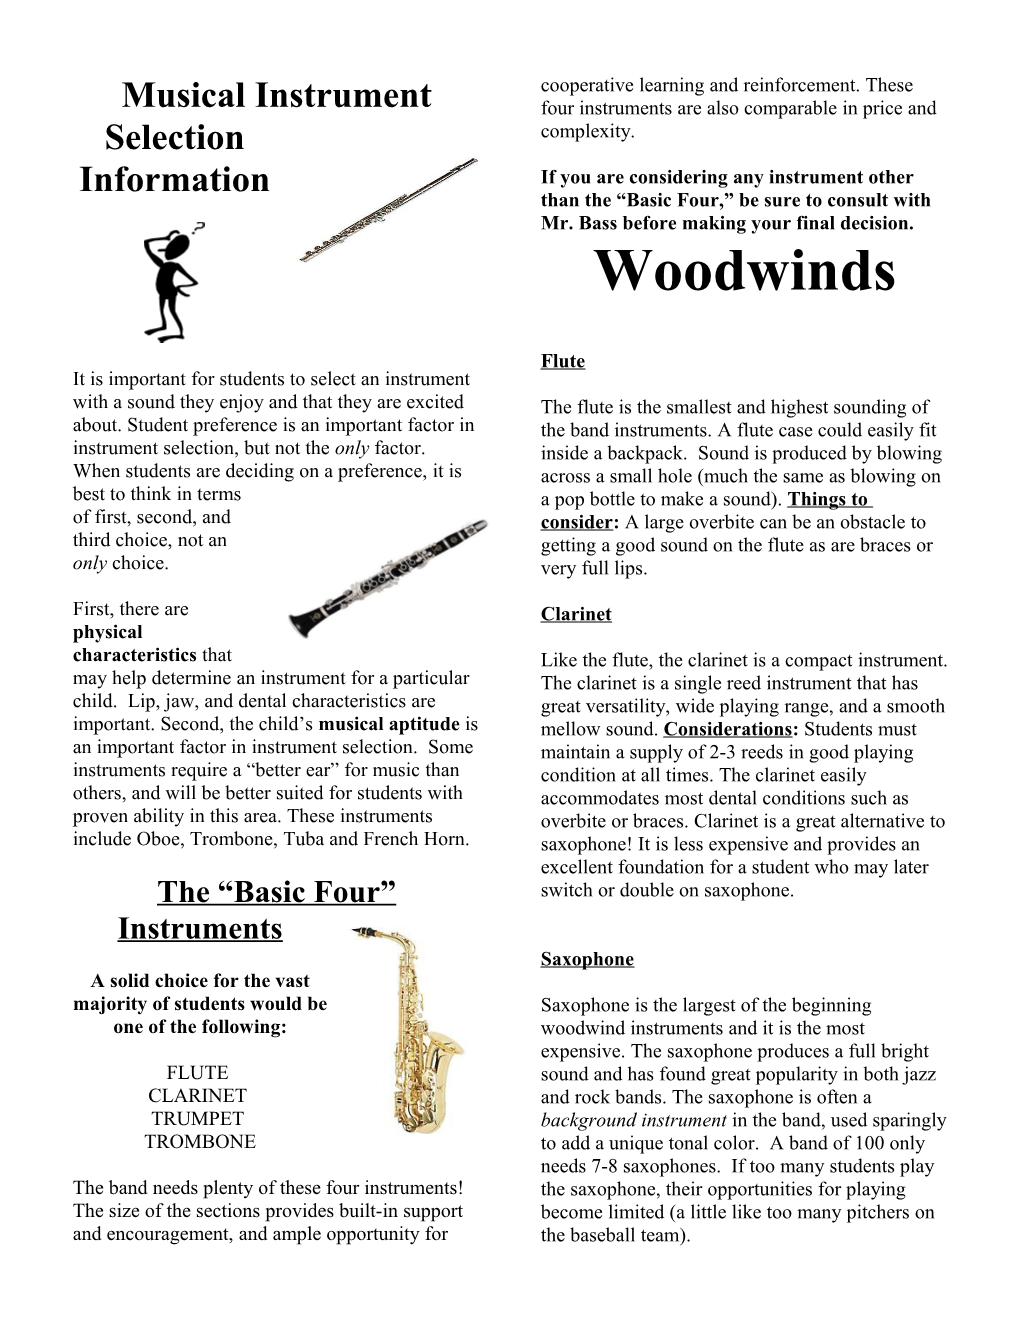 Musical Instrument Selection Information